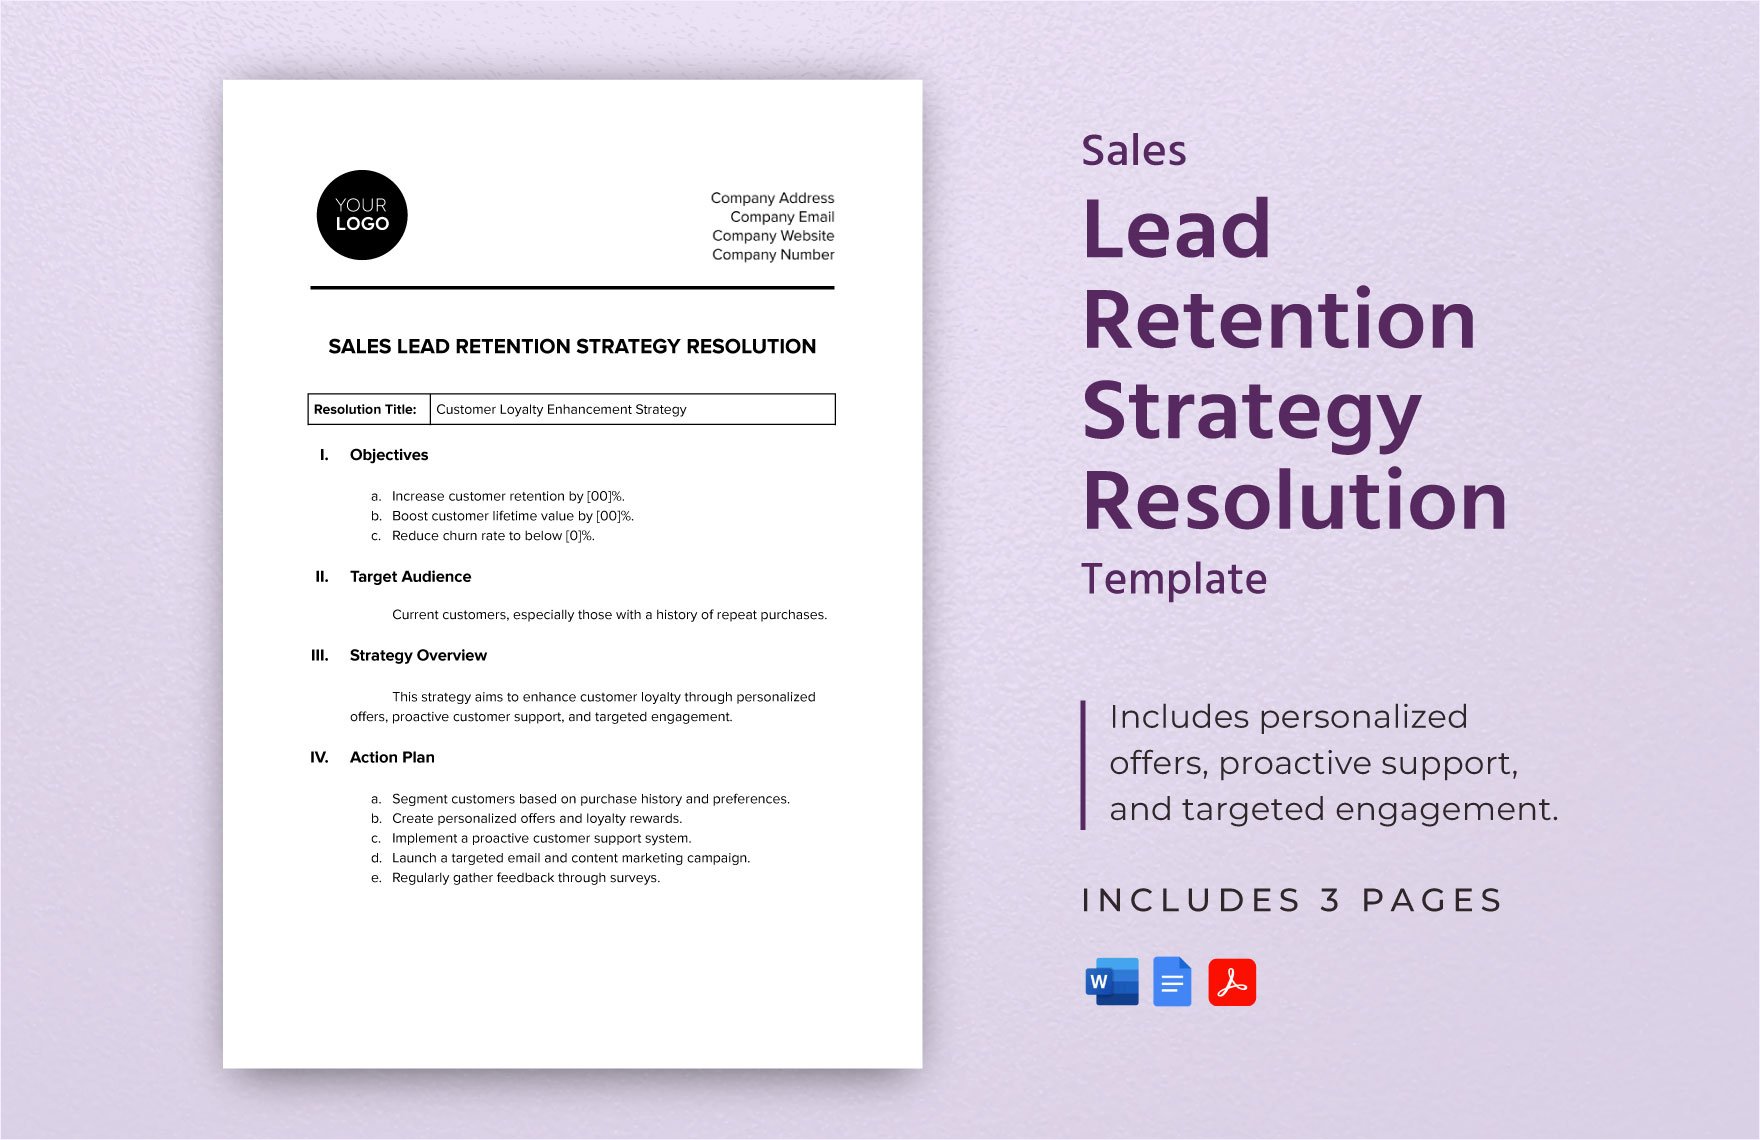 Sales Lead Retention Strategy Resolution Template in Word, Google Docs, PDF